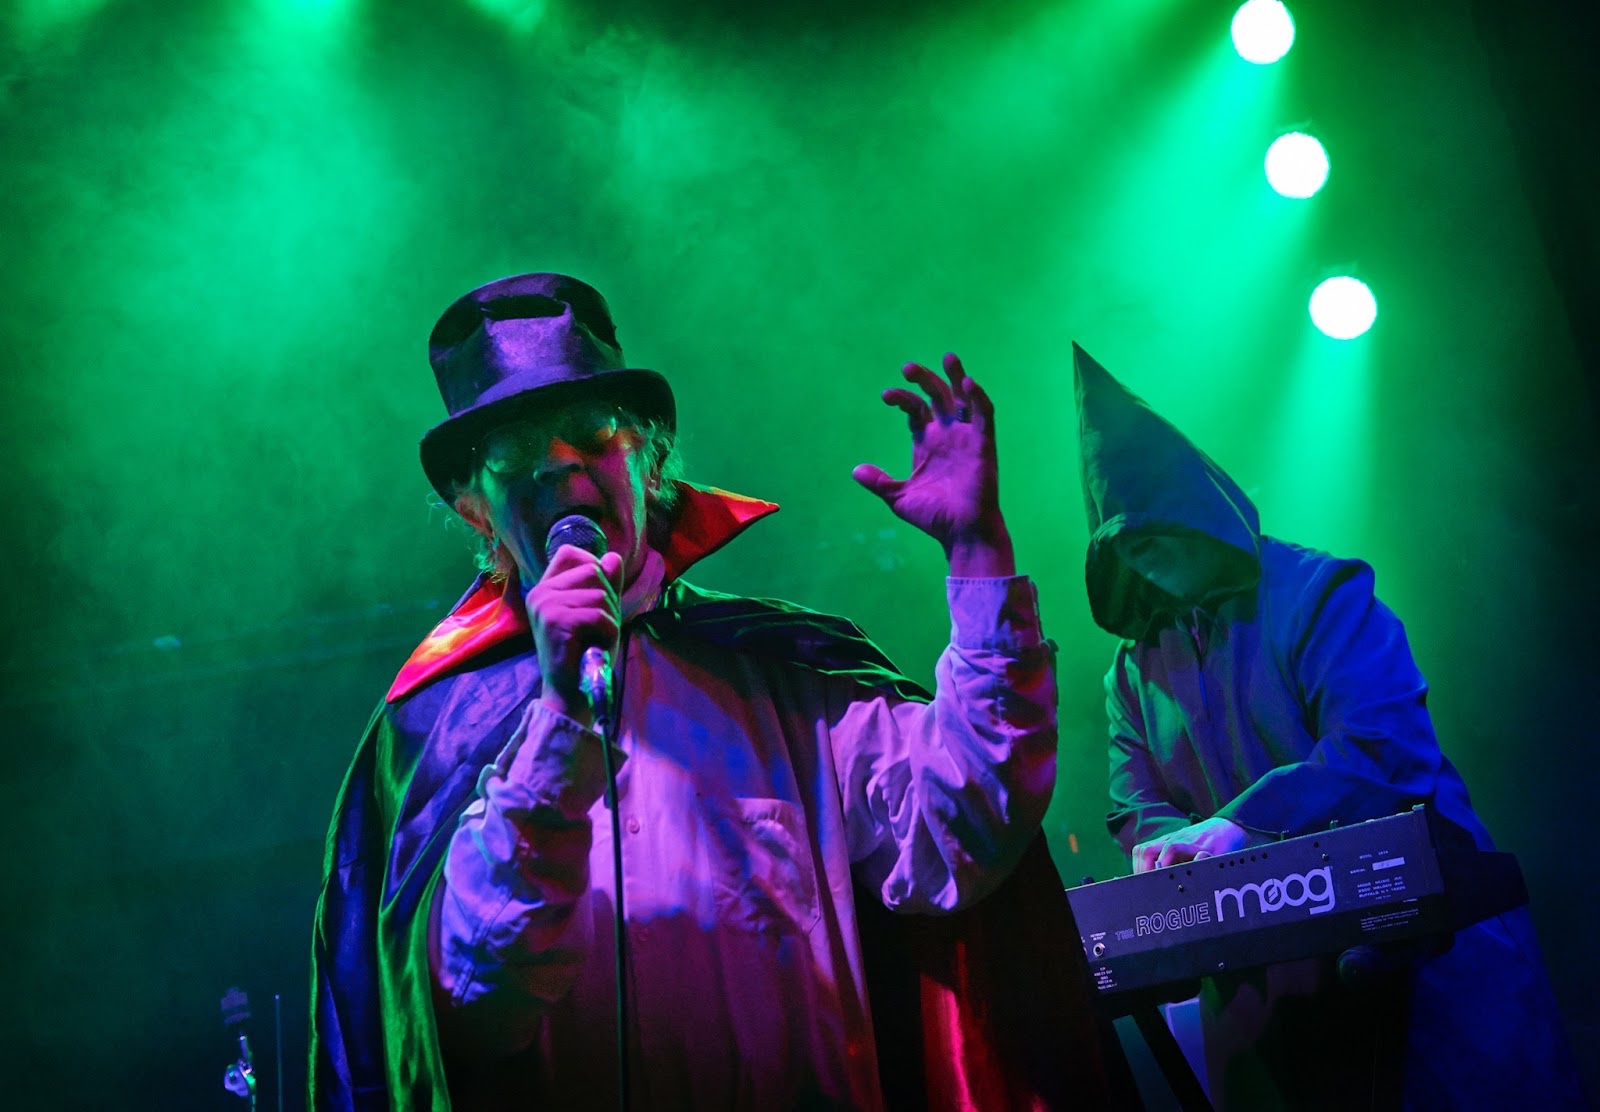 Kalevi Helvetti on stage performing his musical performance in his alter ego vampire costume